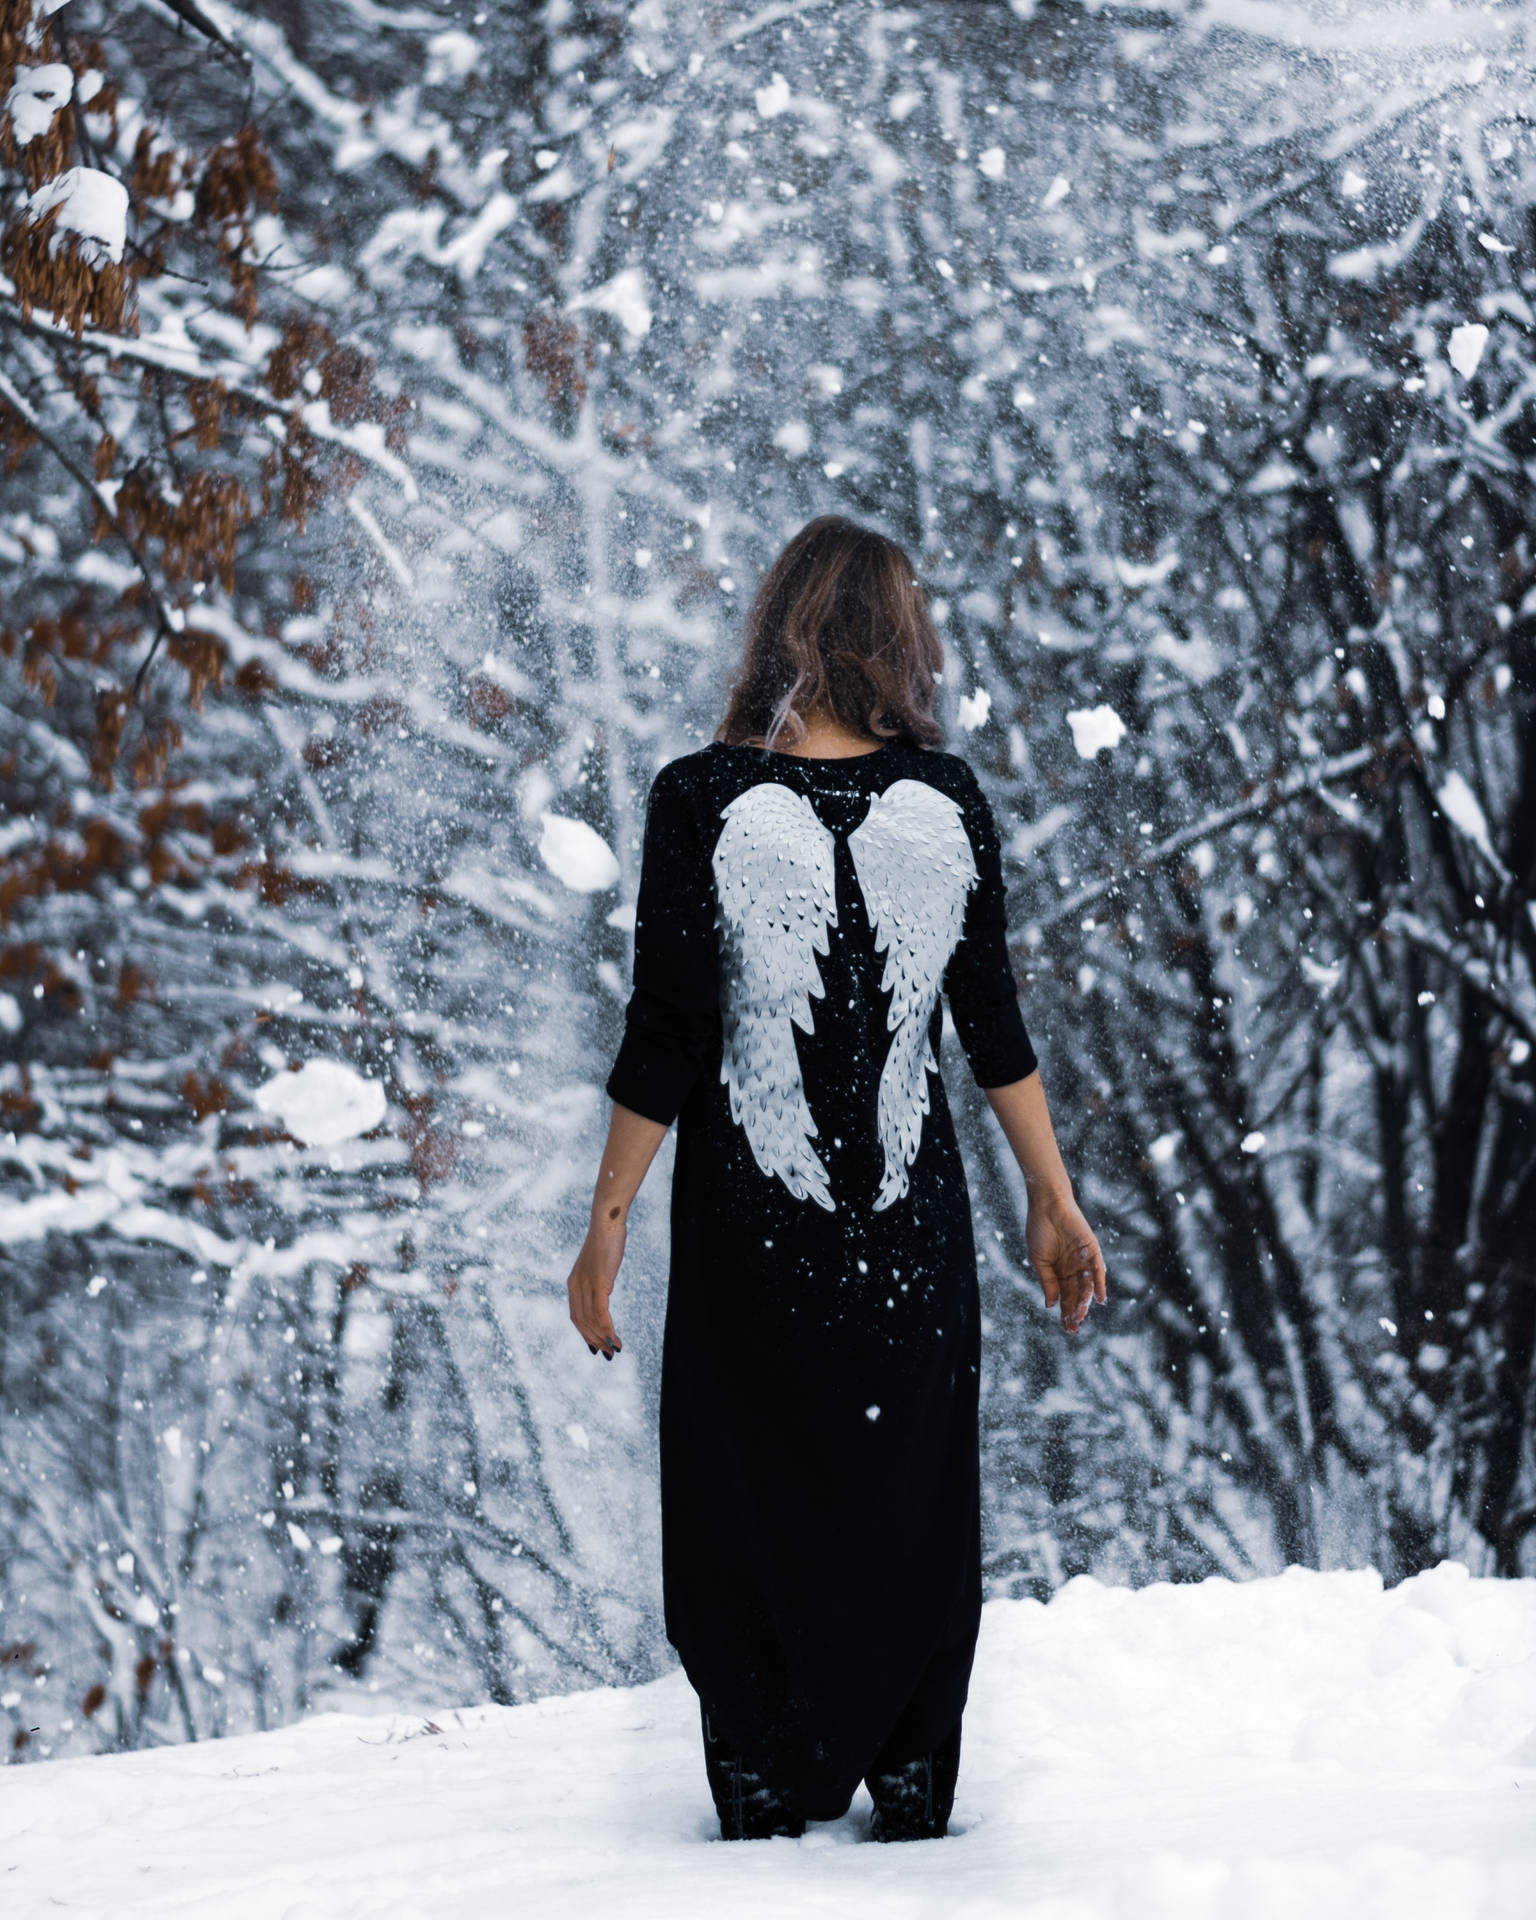 Angel Girl In Snow Picture